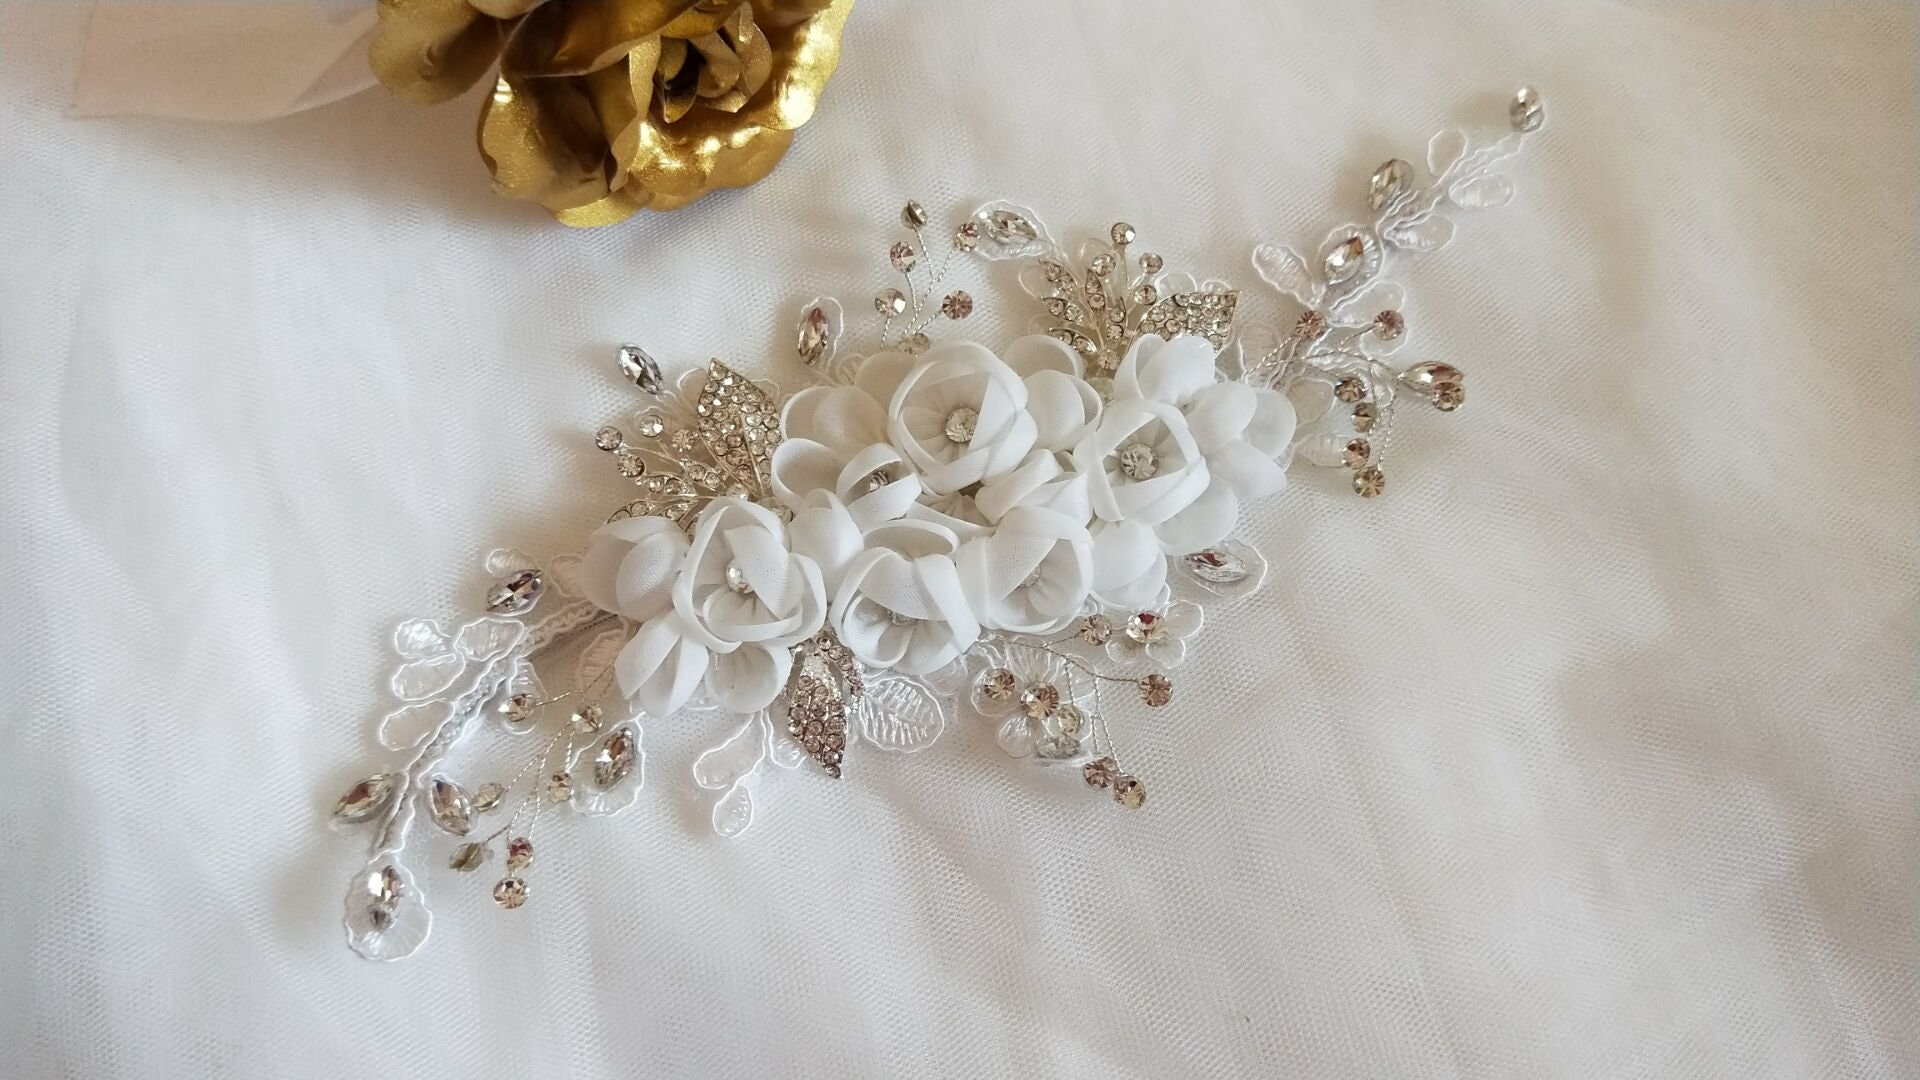 Rhinestone Crystal Applique With 3D Flowers for Bridal - Etsy